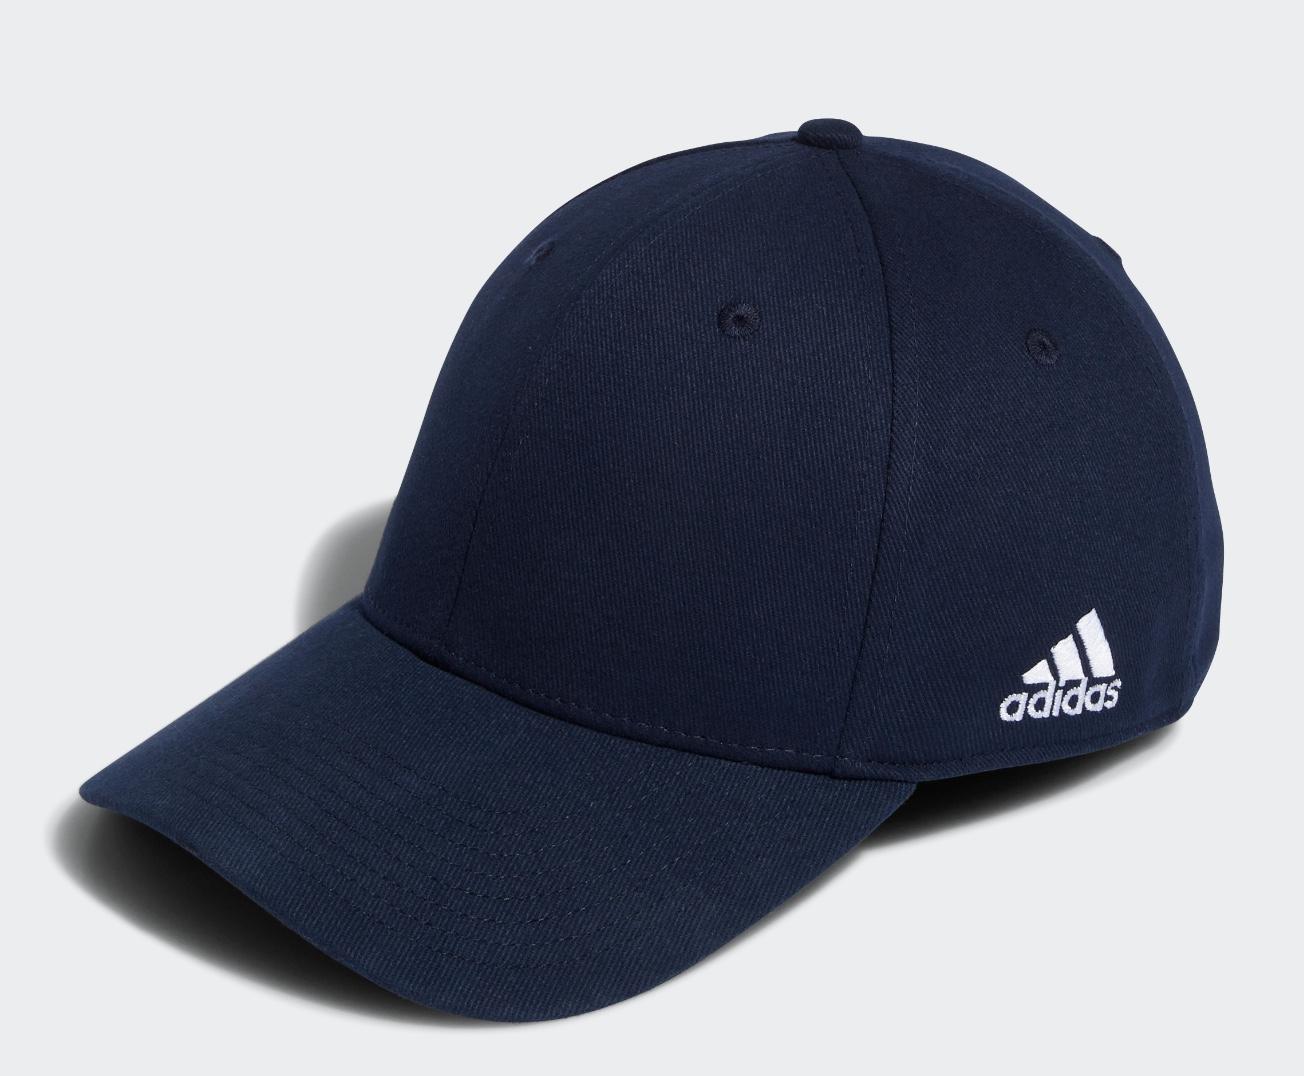 adidas Mens Structured Flex Hat for $9.75 Shipped